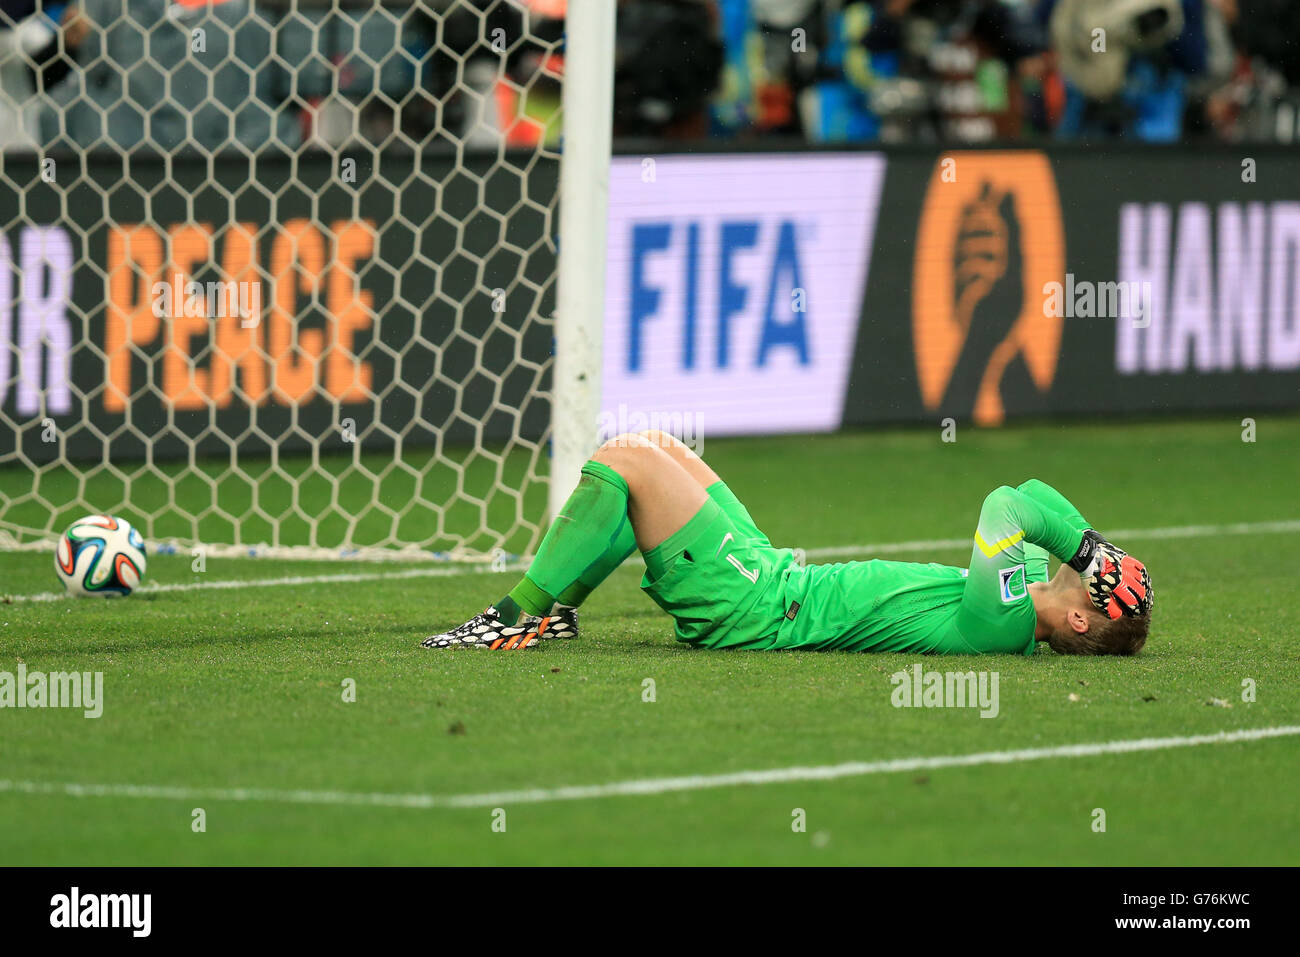 Netherlands goalkeeper Jasper Cillessen is left dejected following their loss in the penalty shoot-out during the FIFA World Cup Semi Final at the Arena de Sao Paulo, Sao Paulo, Brazil. Stock Photo